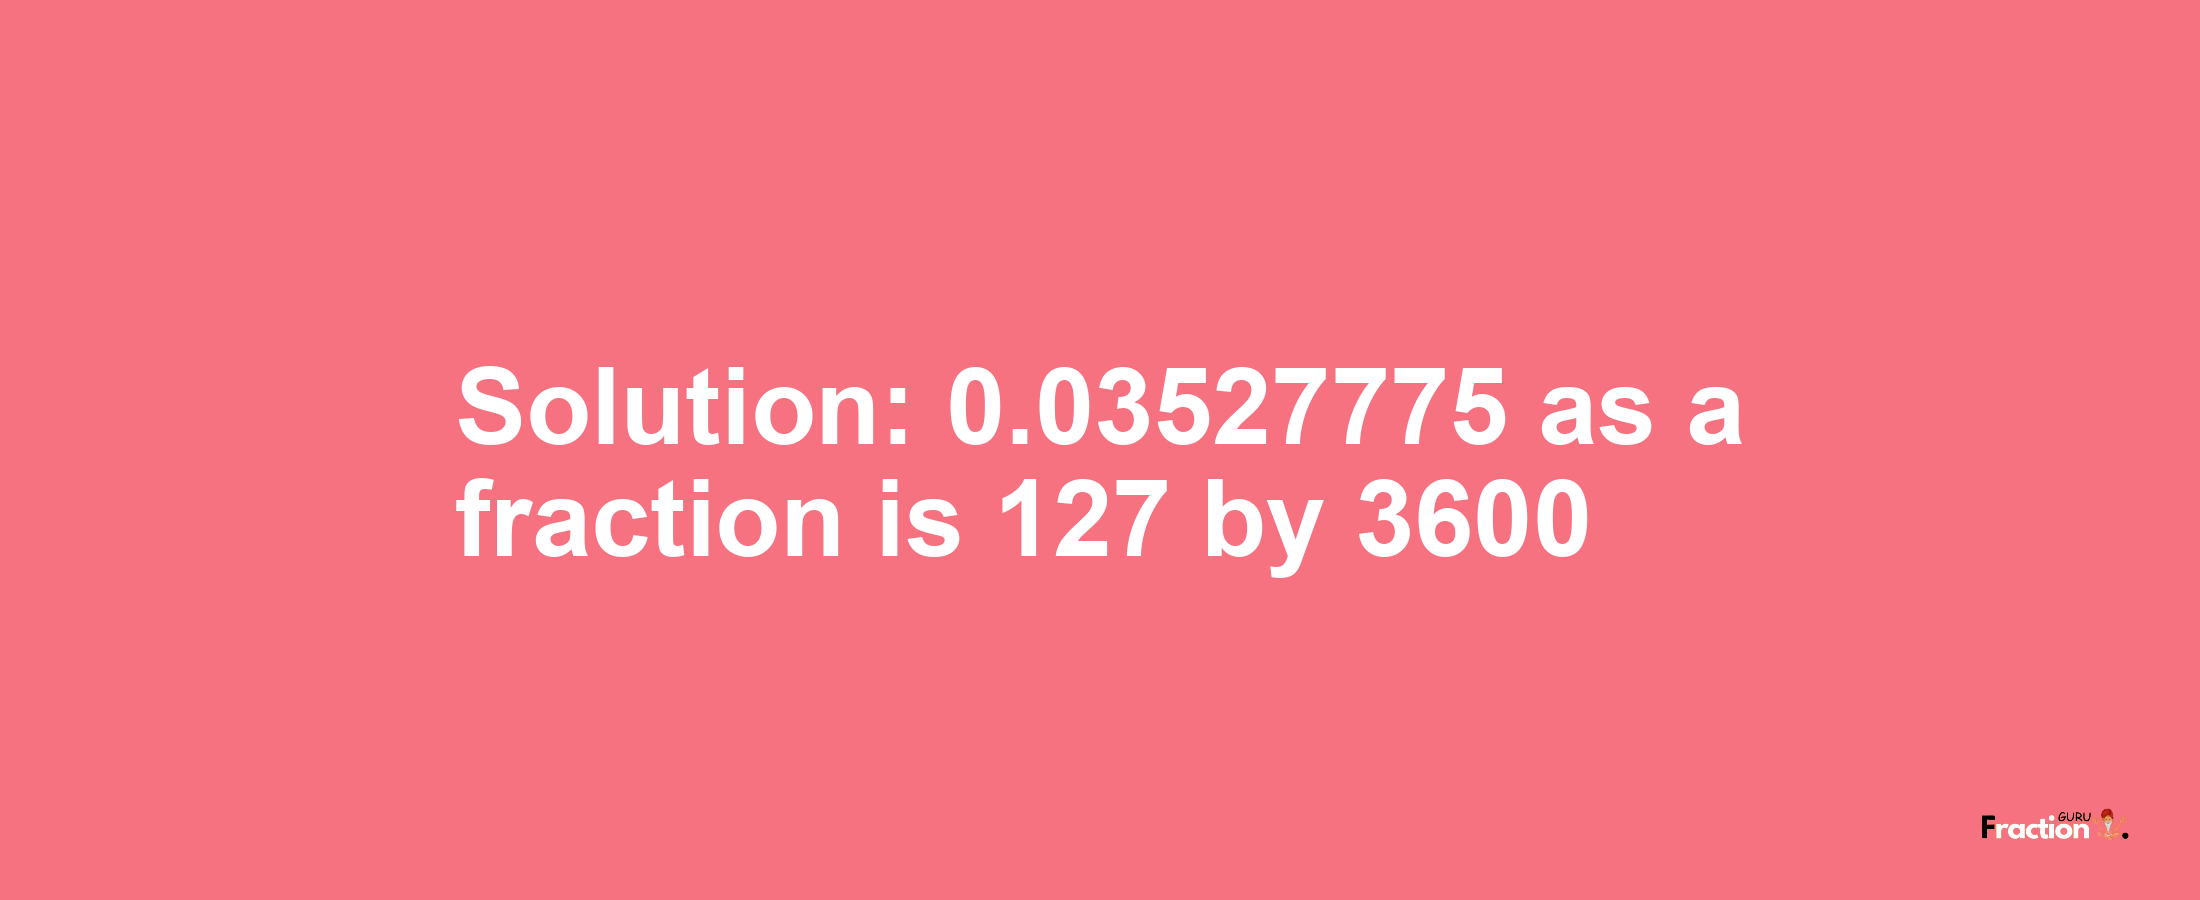 Solution:0.03527775 as a fraction is 127/3600